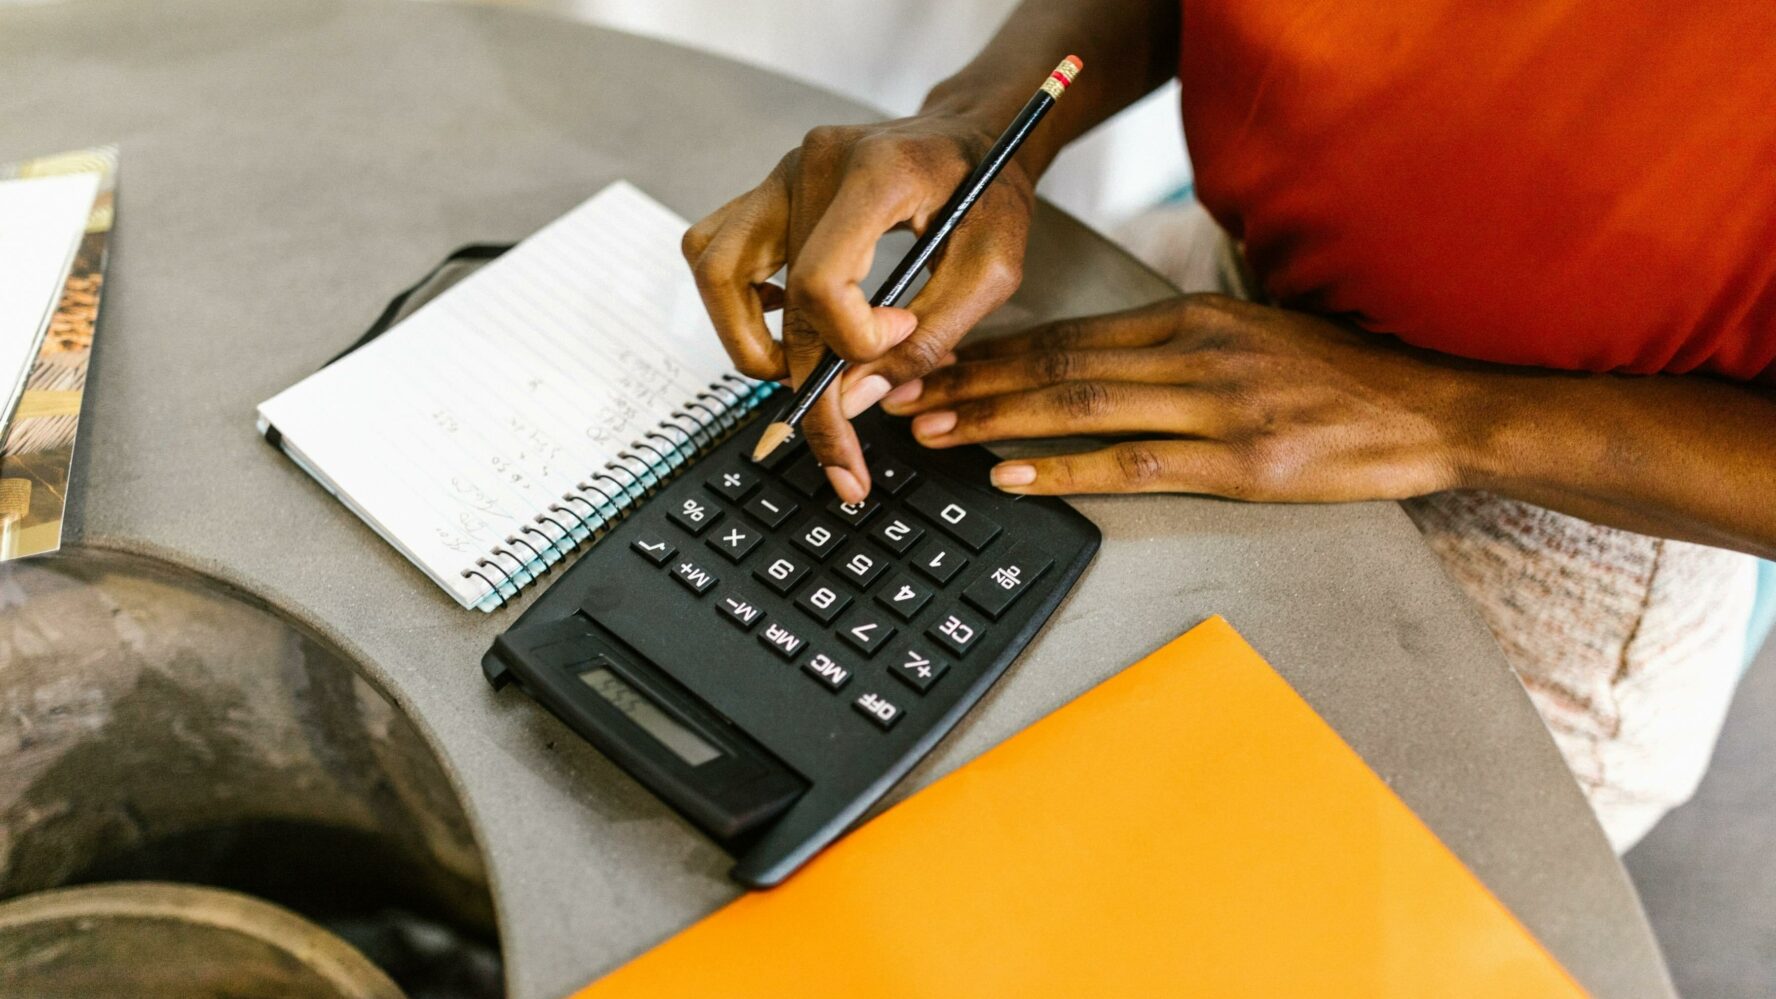 Woman typing on a calculator, holding a pen ready to write in her notebook which is next to her.